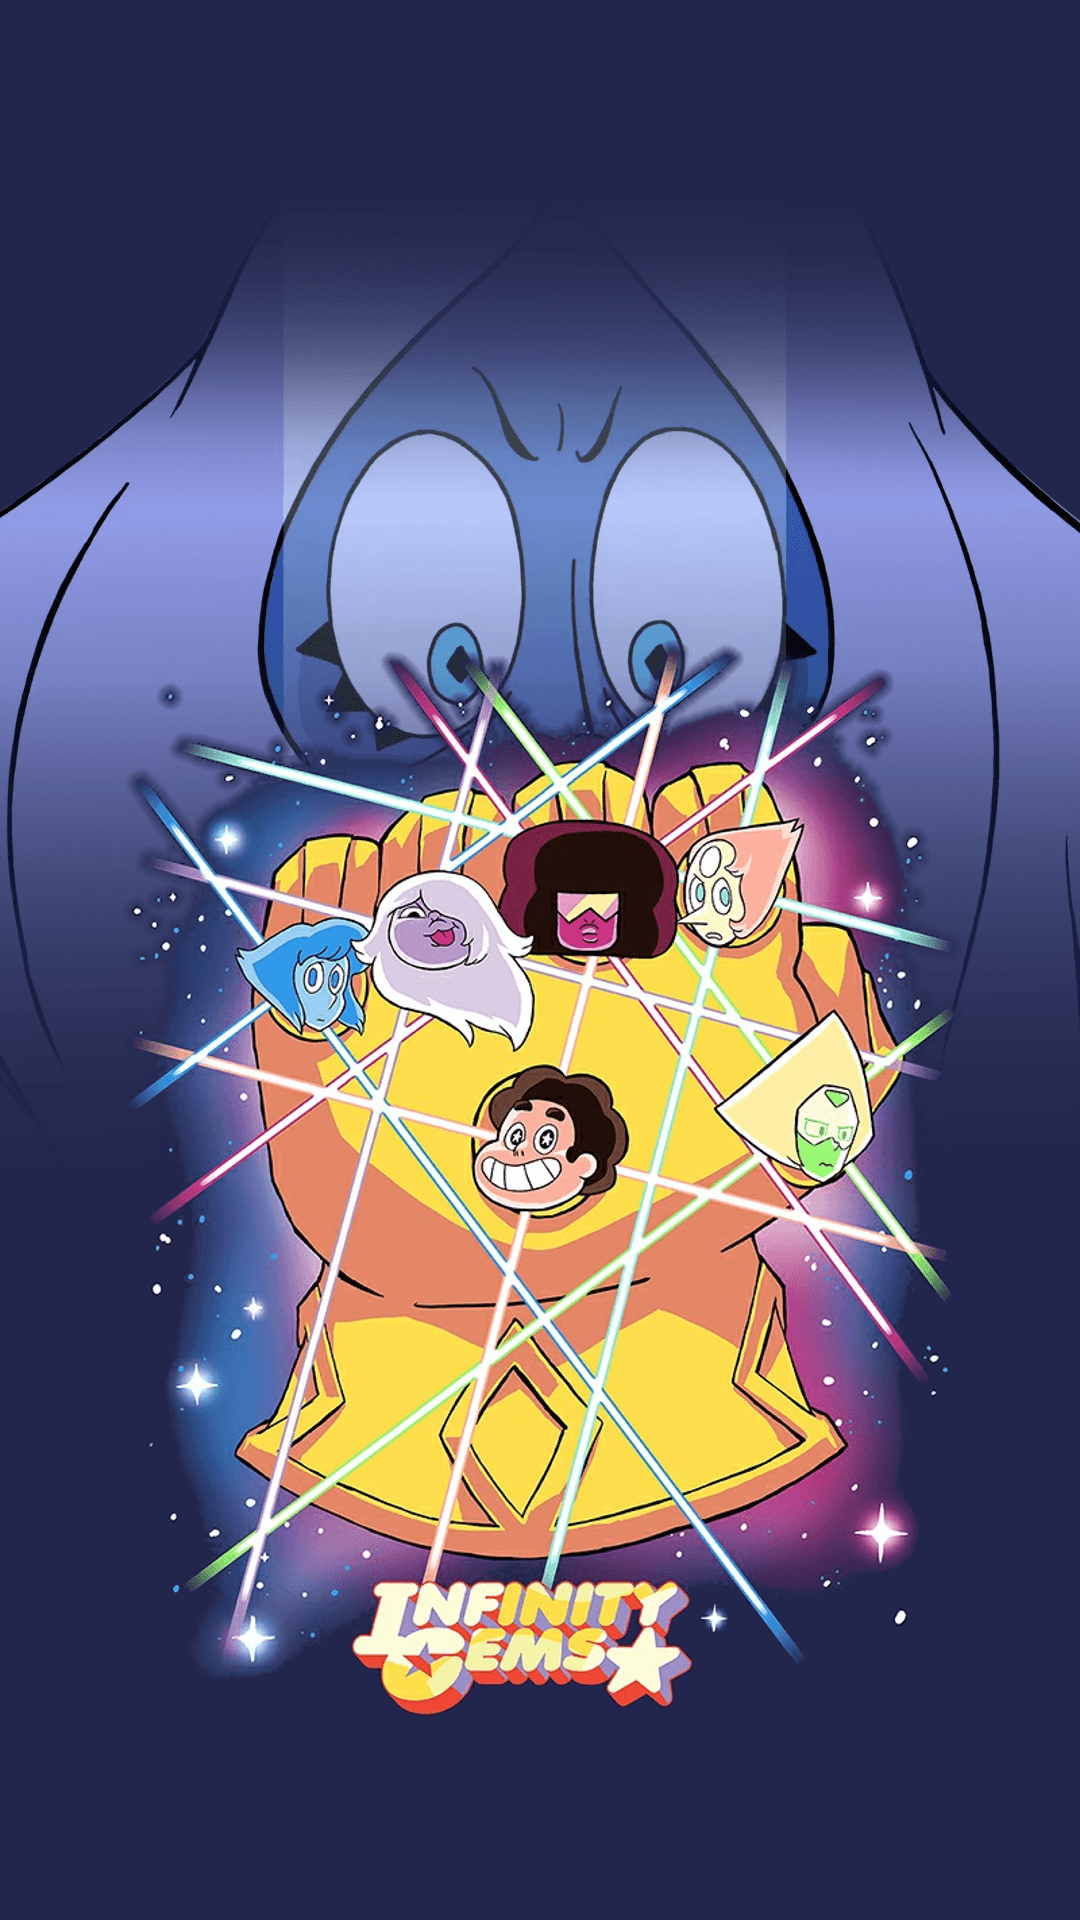 Someone asked for a phone wallpaper of the Infinity Gem artwork